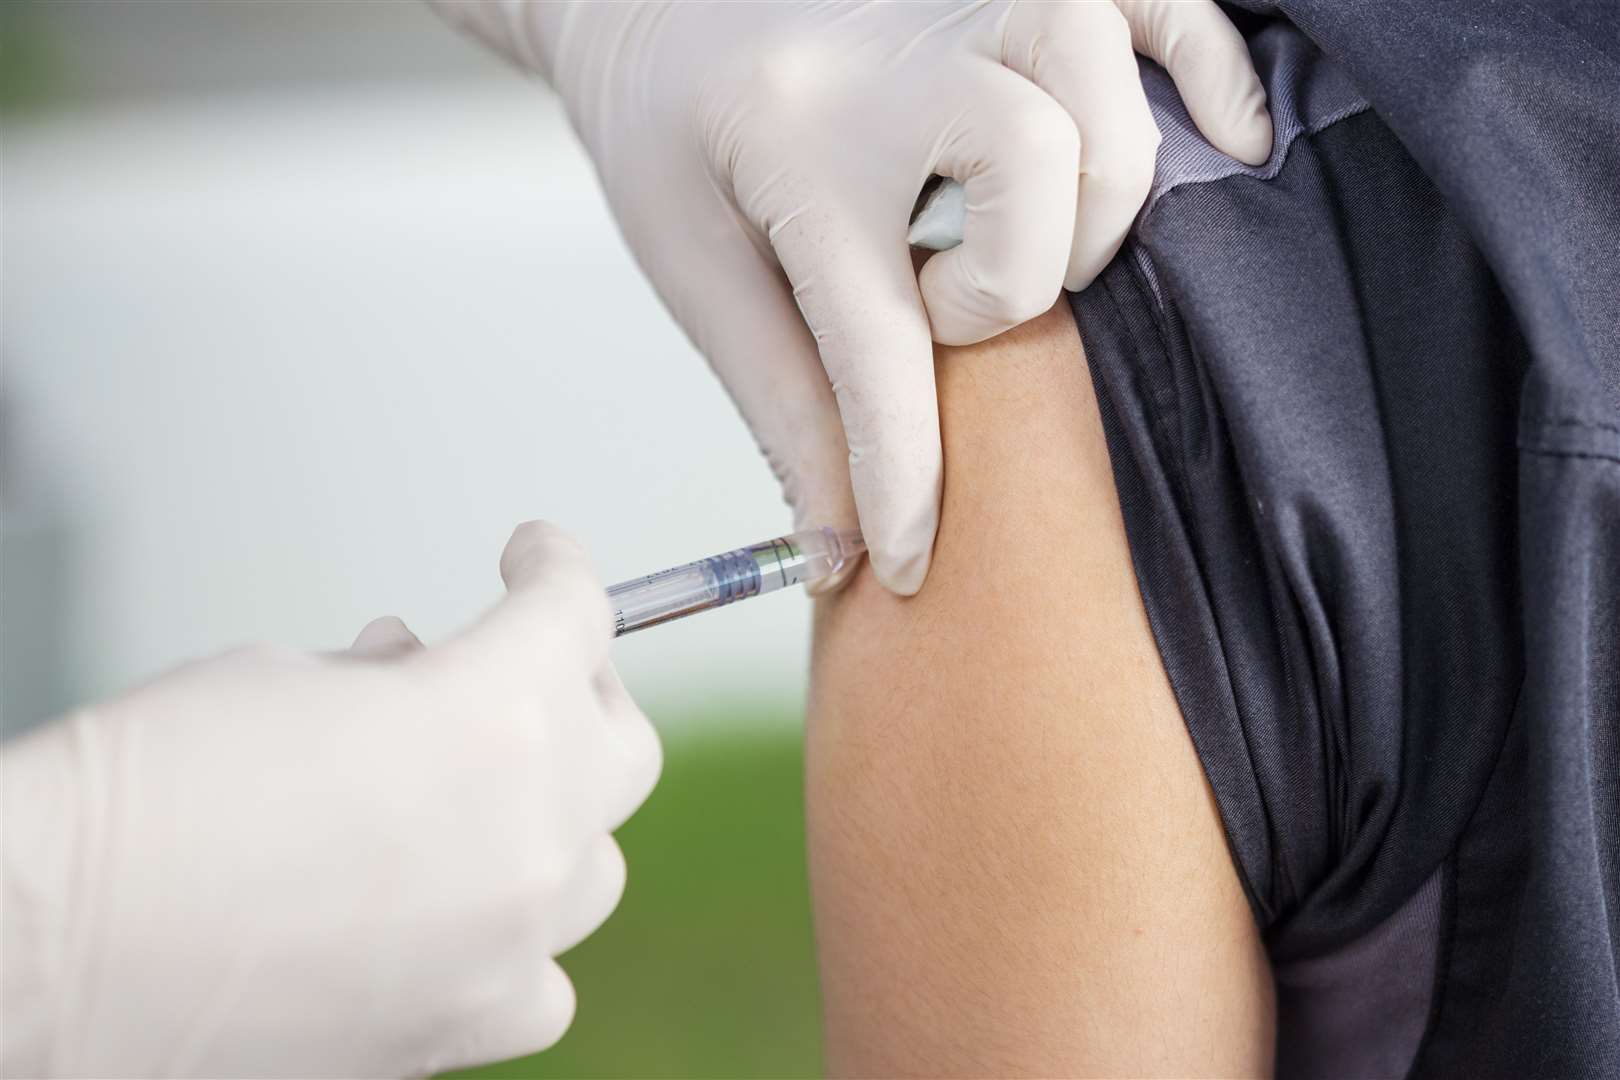 People have been given fake Covid vaccines by criminals to extort large payments from them.